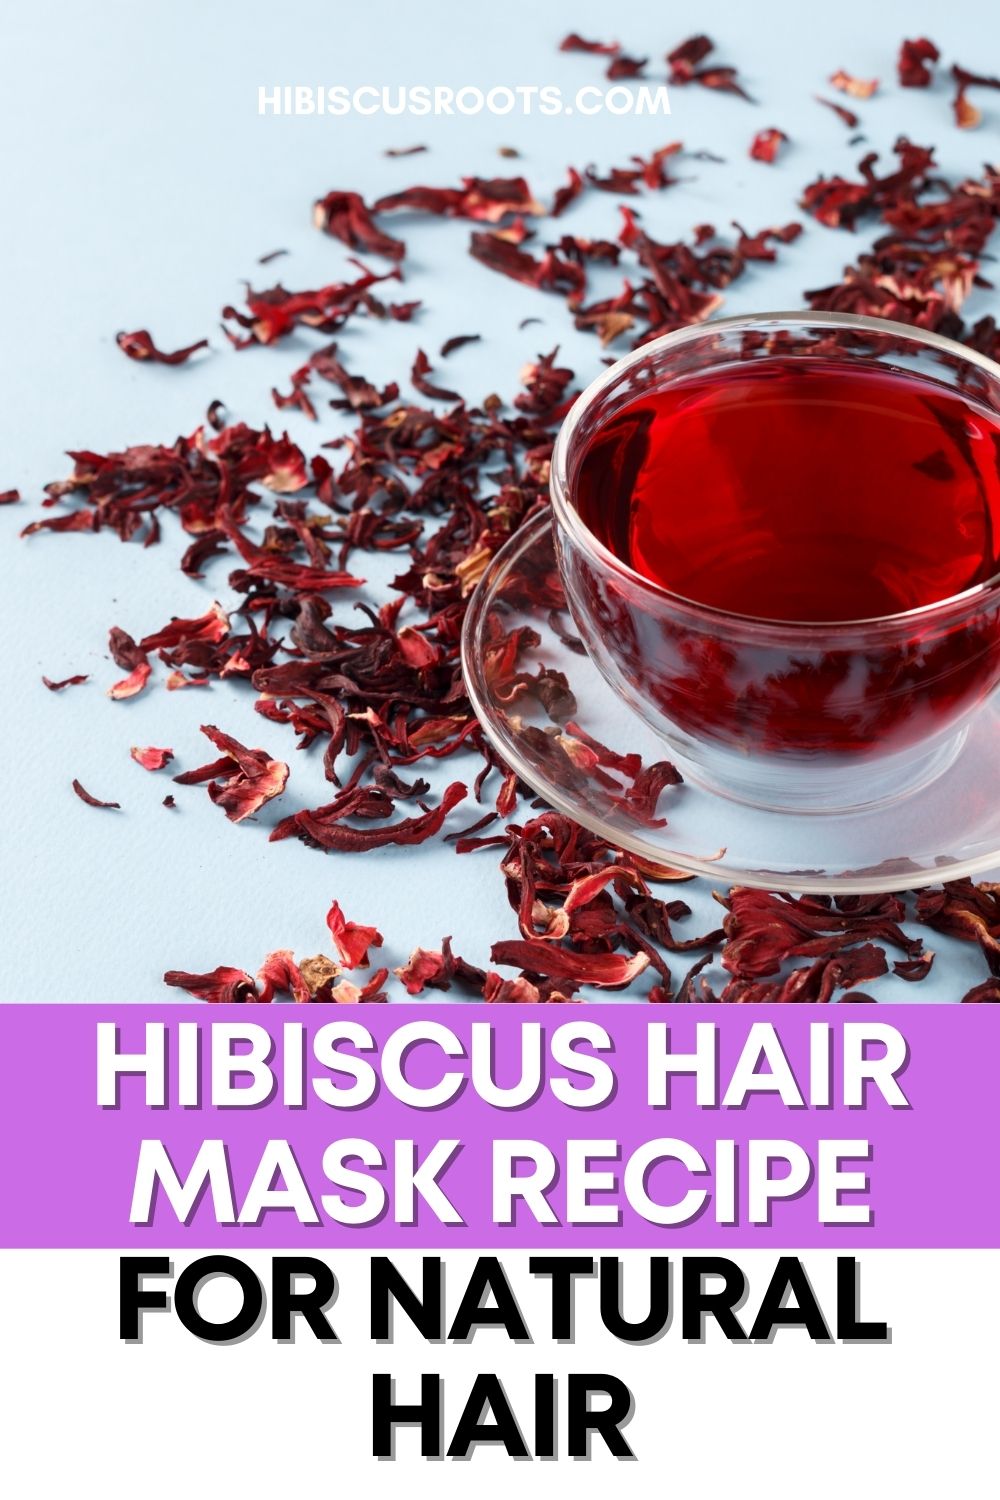 Why Hibiscus Is Our Favorite Ingredient for Healthy Natural Hair!